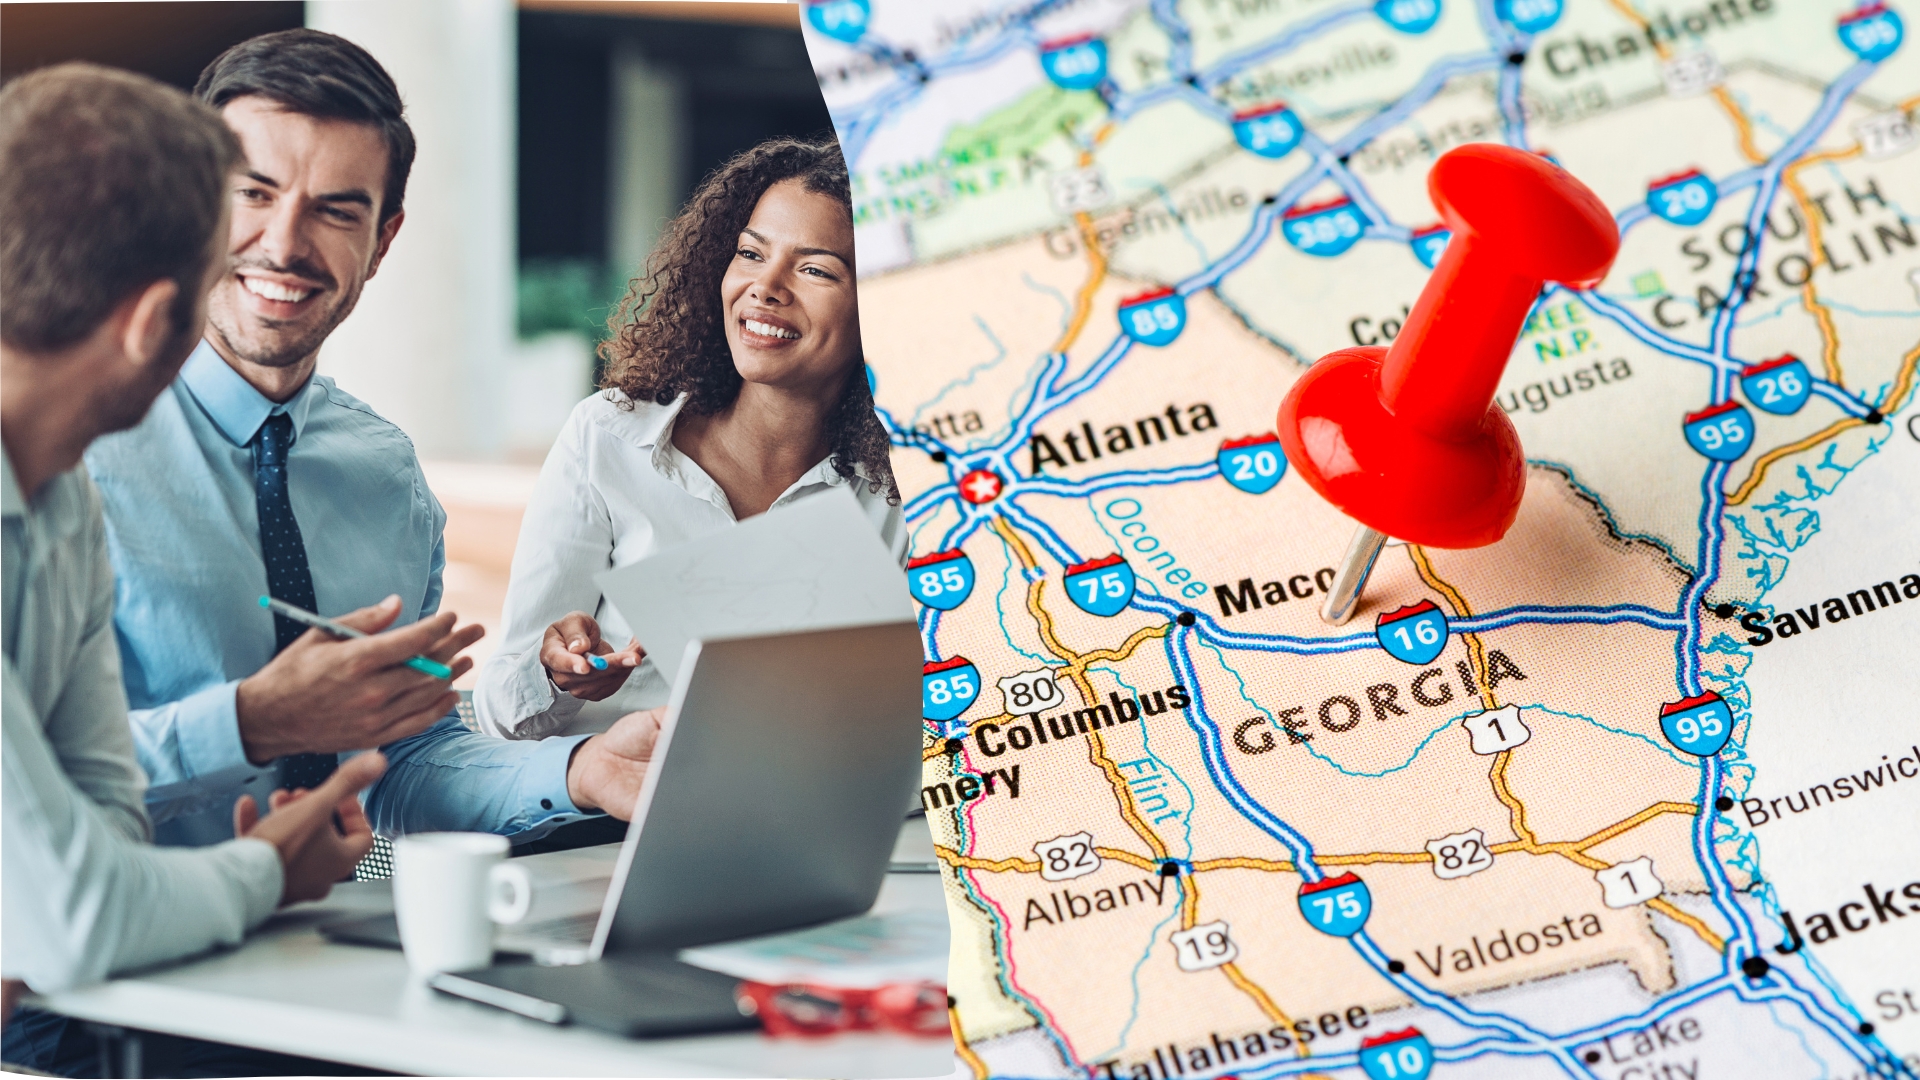 MBA Programs in Georgia - featured image